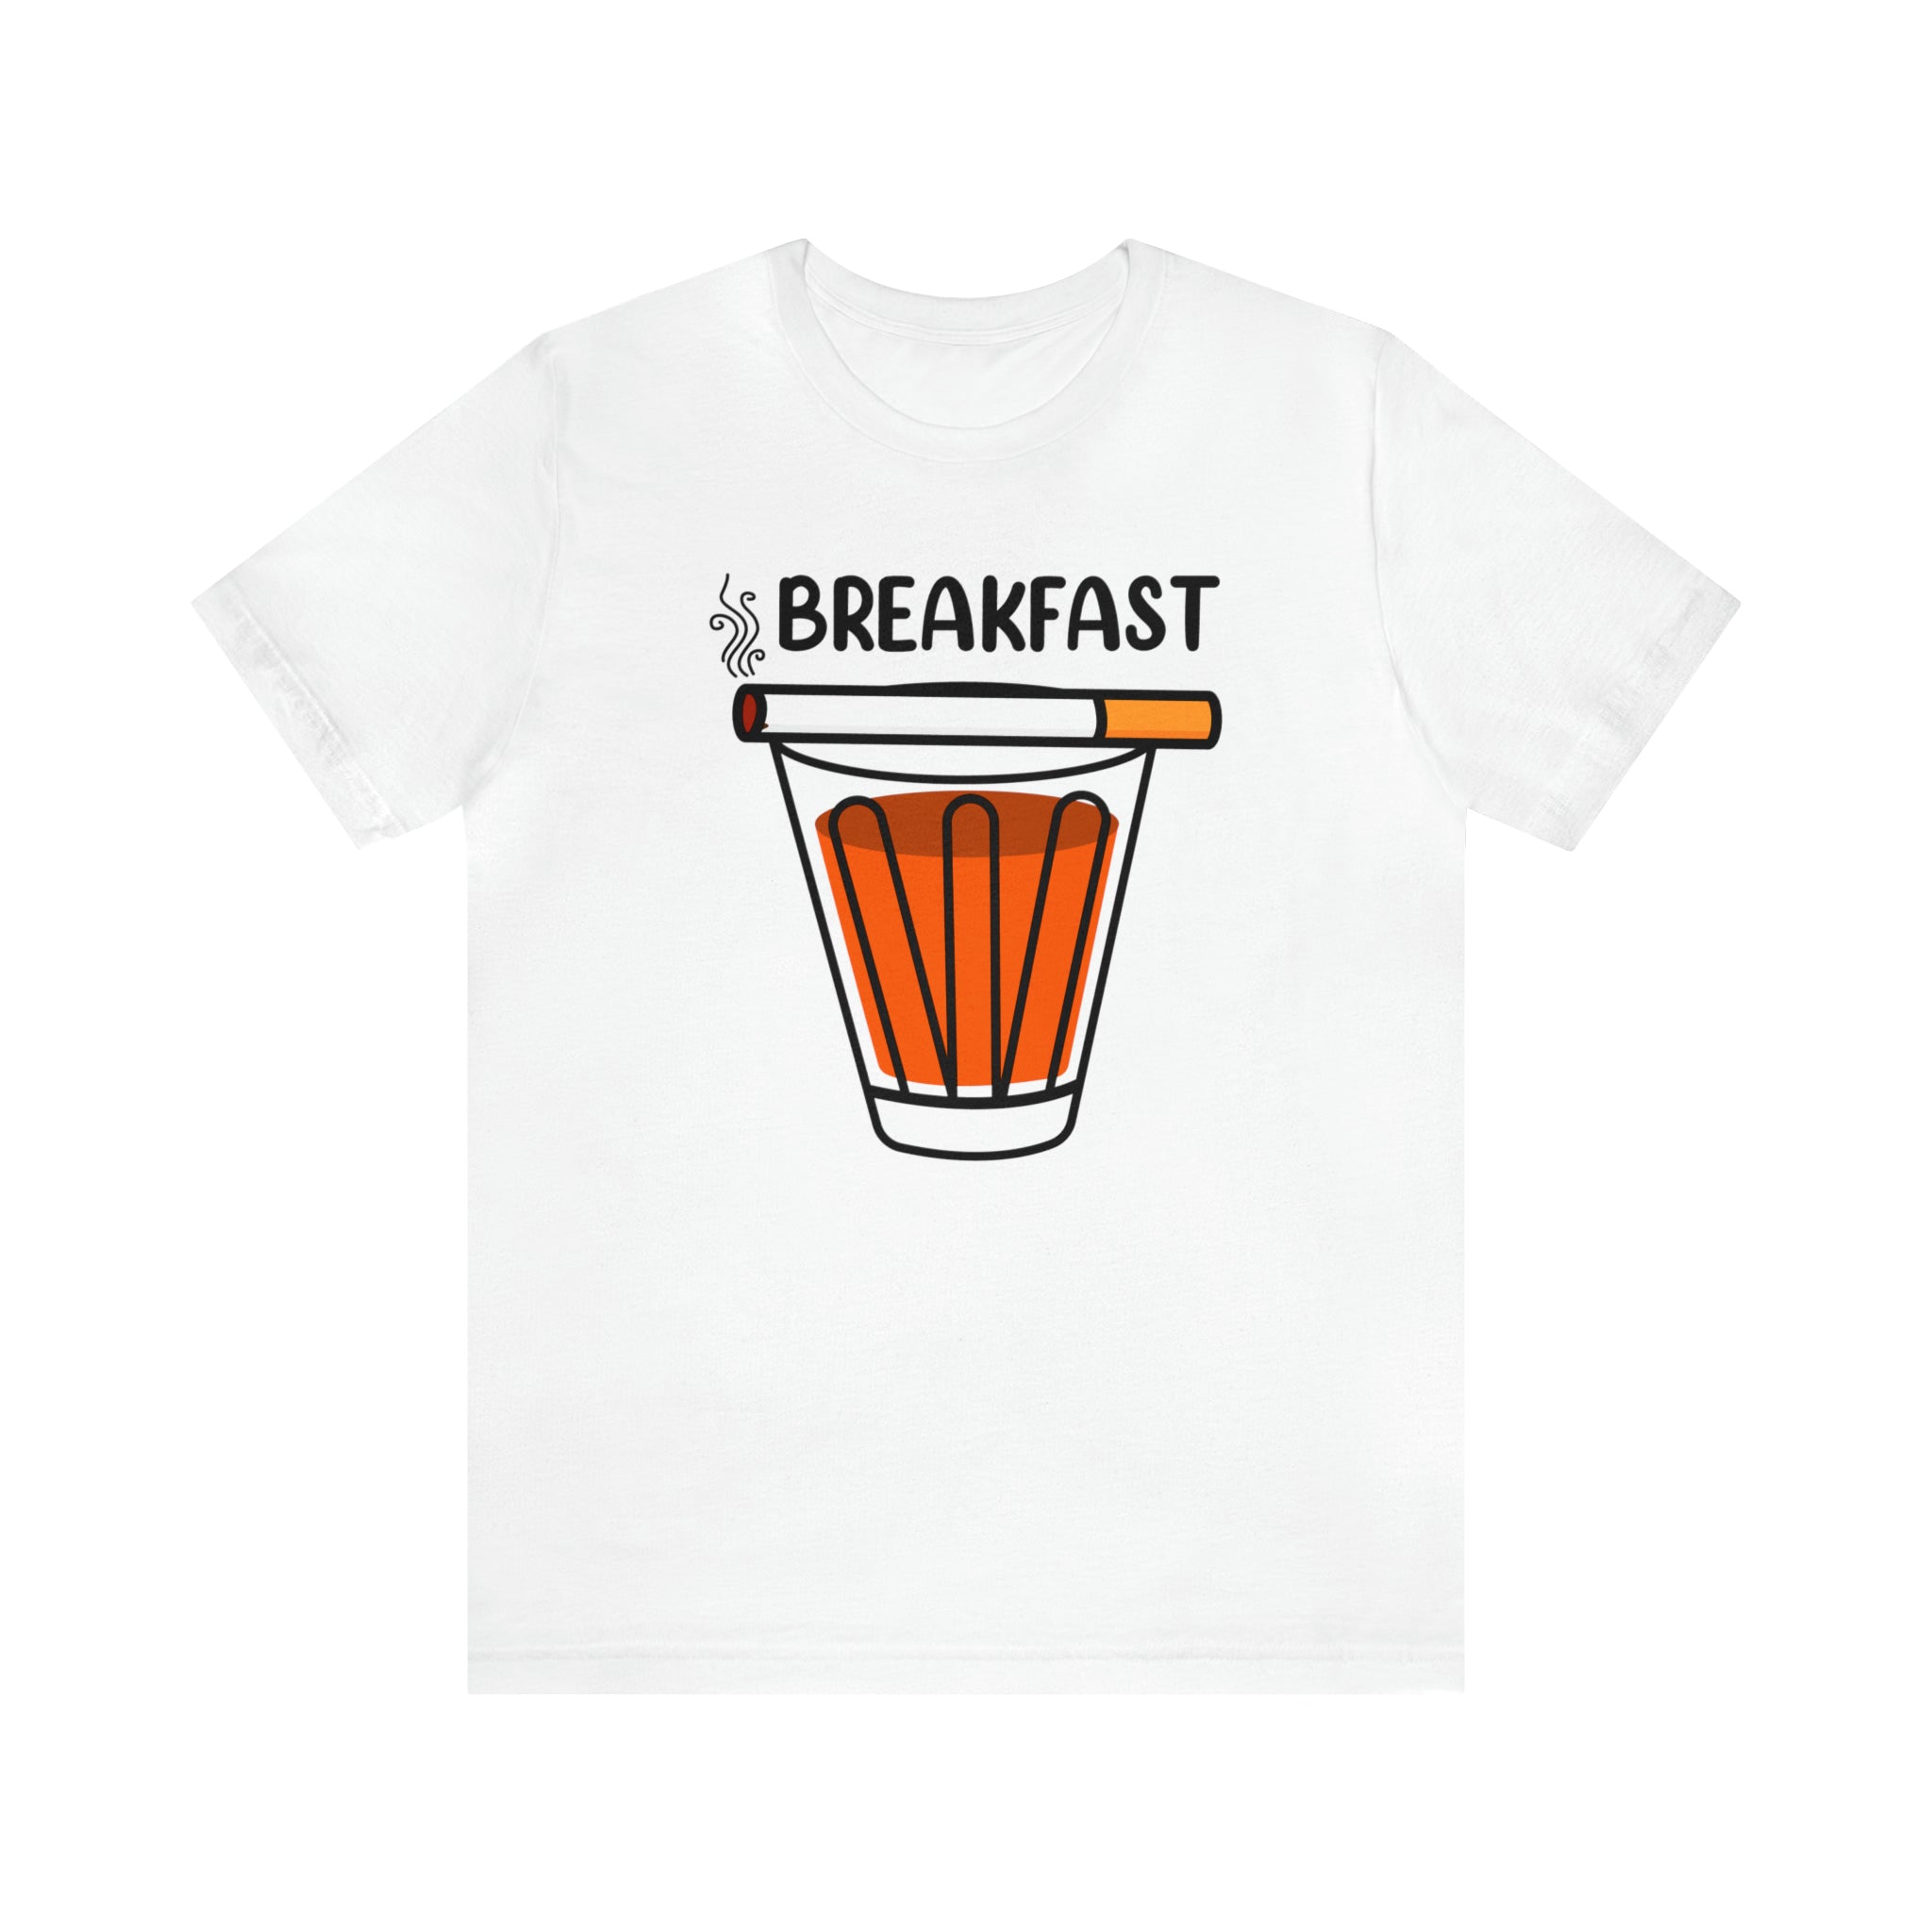 A white Breakfast T-Shirt, perfect for foodie-inspired fashion aficionados.